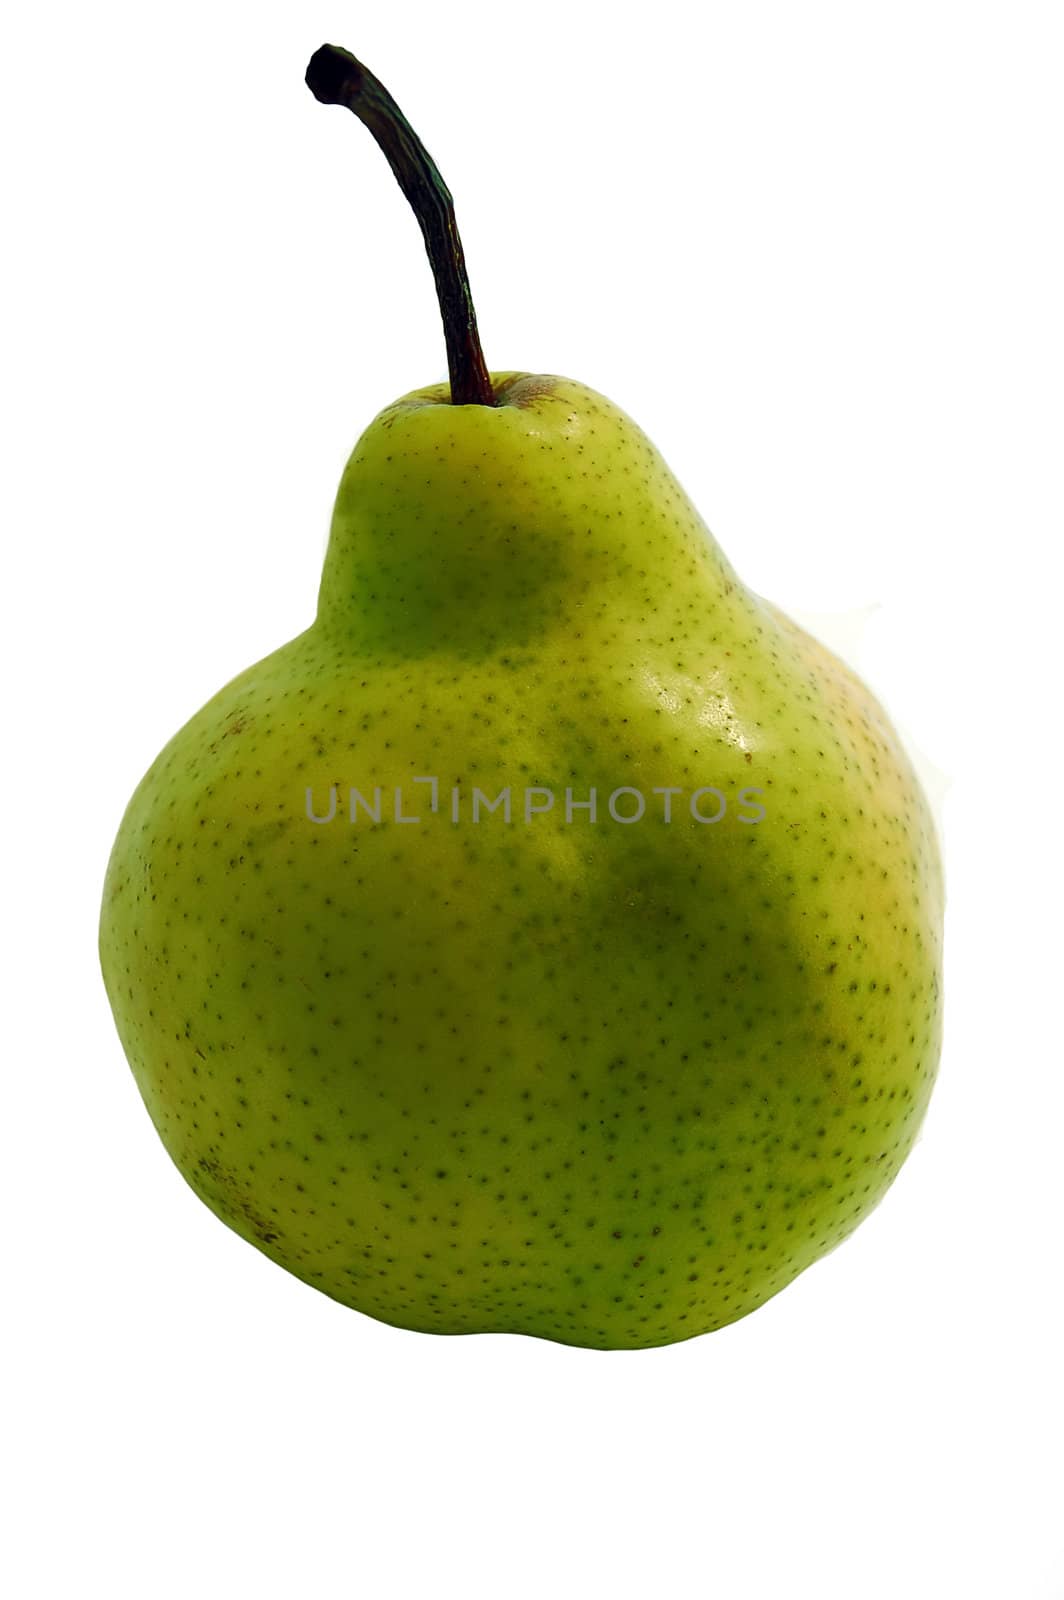 green pear full of freshness and aroma